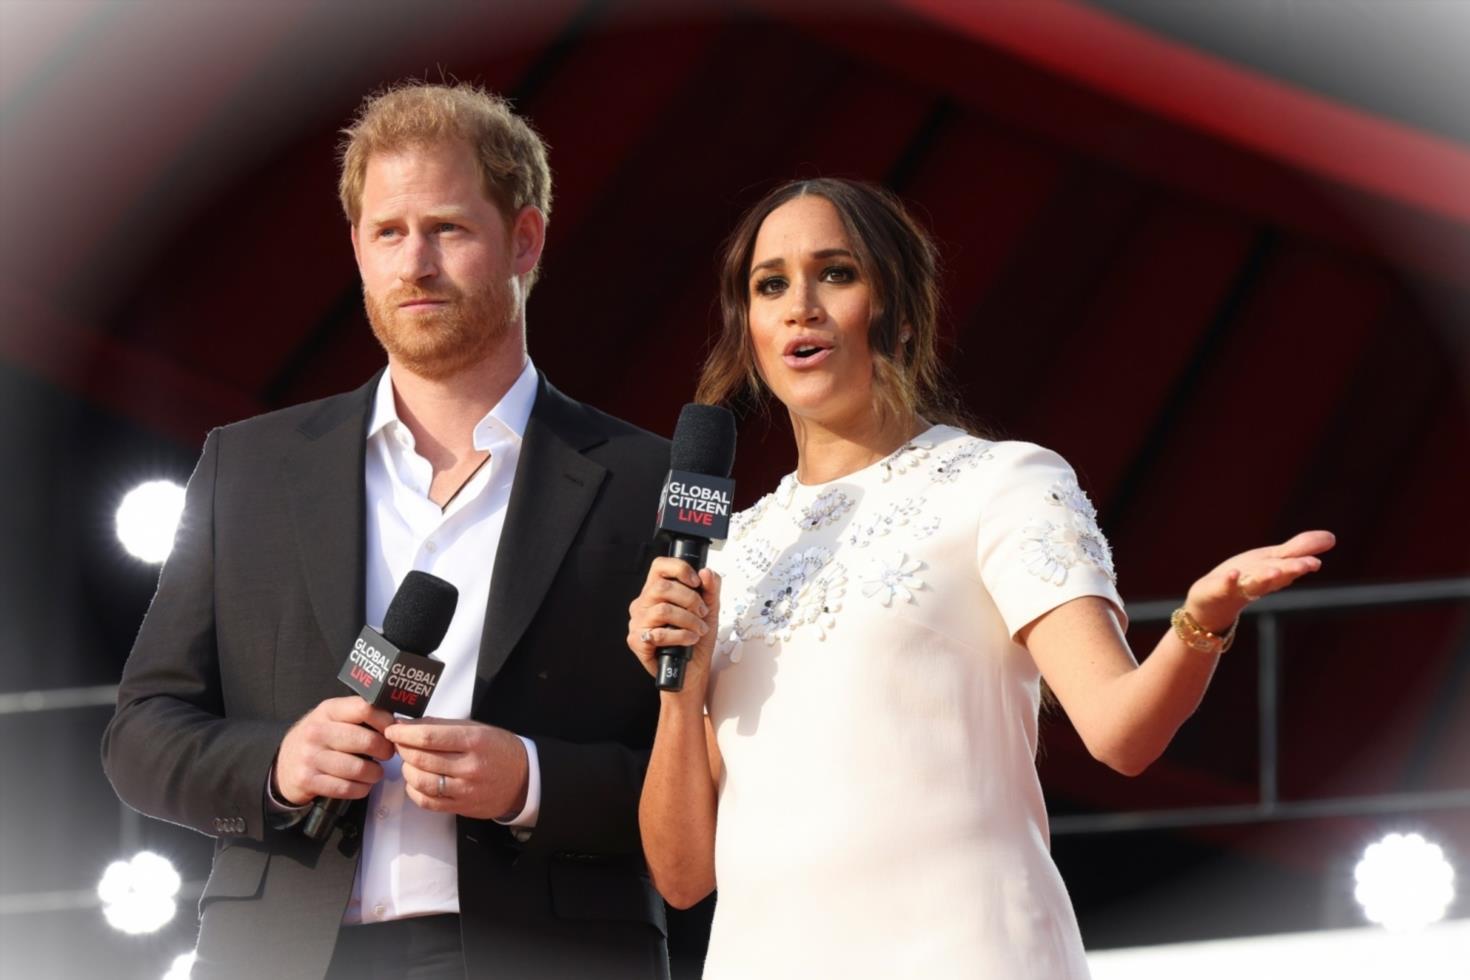 Prince Harry and Meghan Markles Titles Debated at Top Levels Yett2rrrg5uO 5